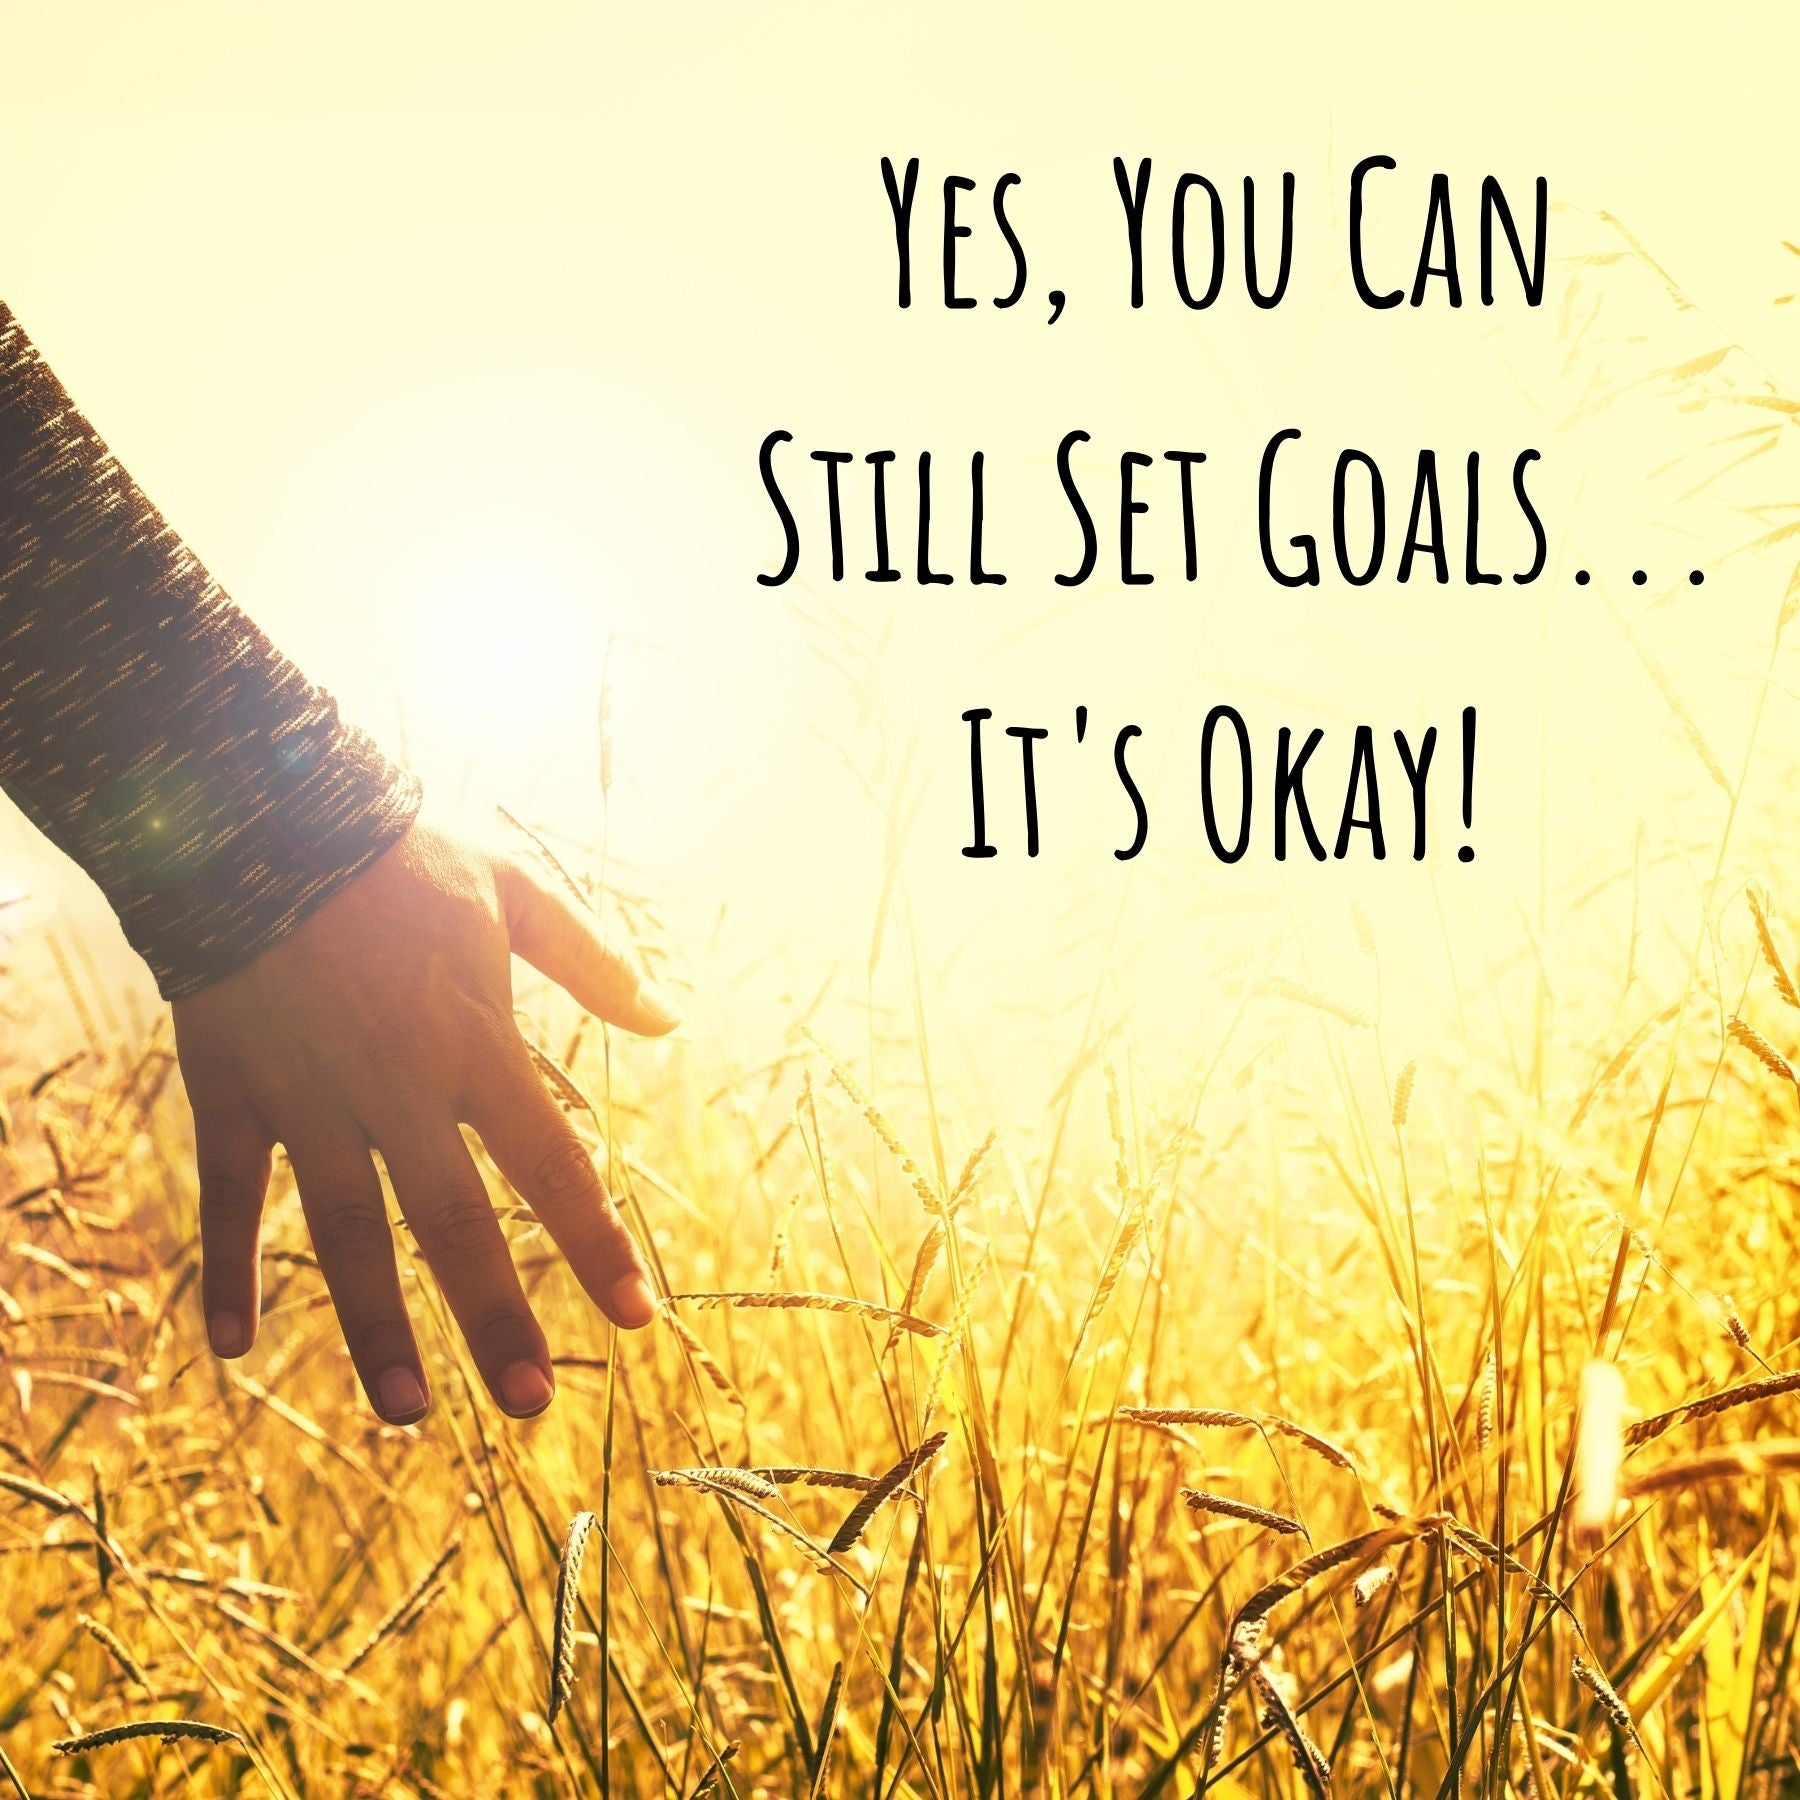 Yes, You Can Still Set Goals...It's Okay!